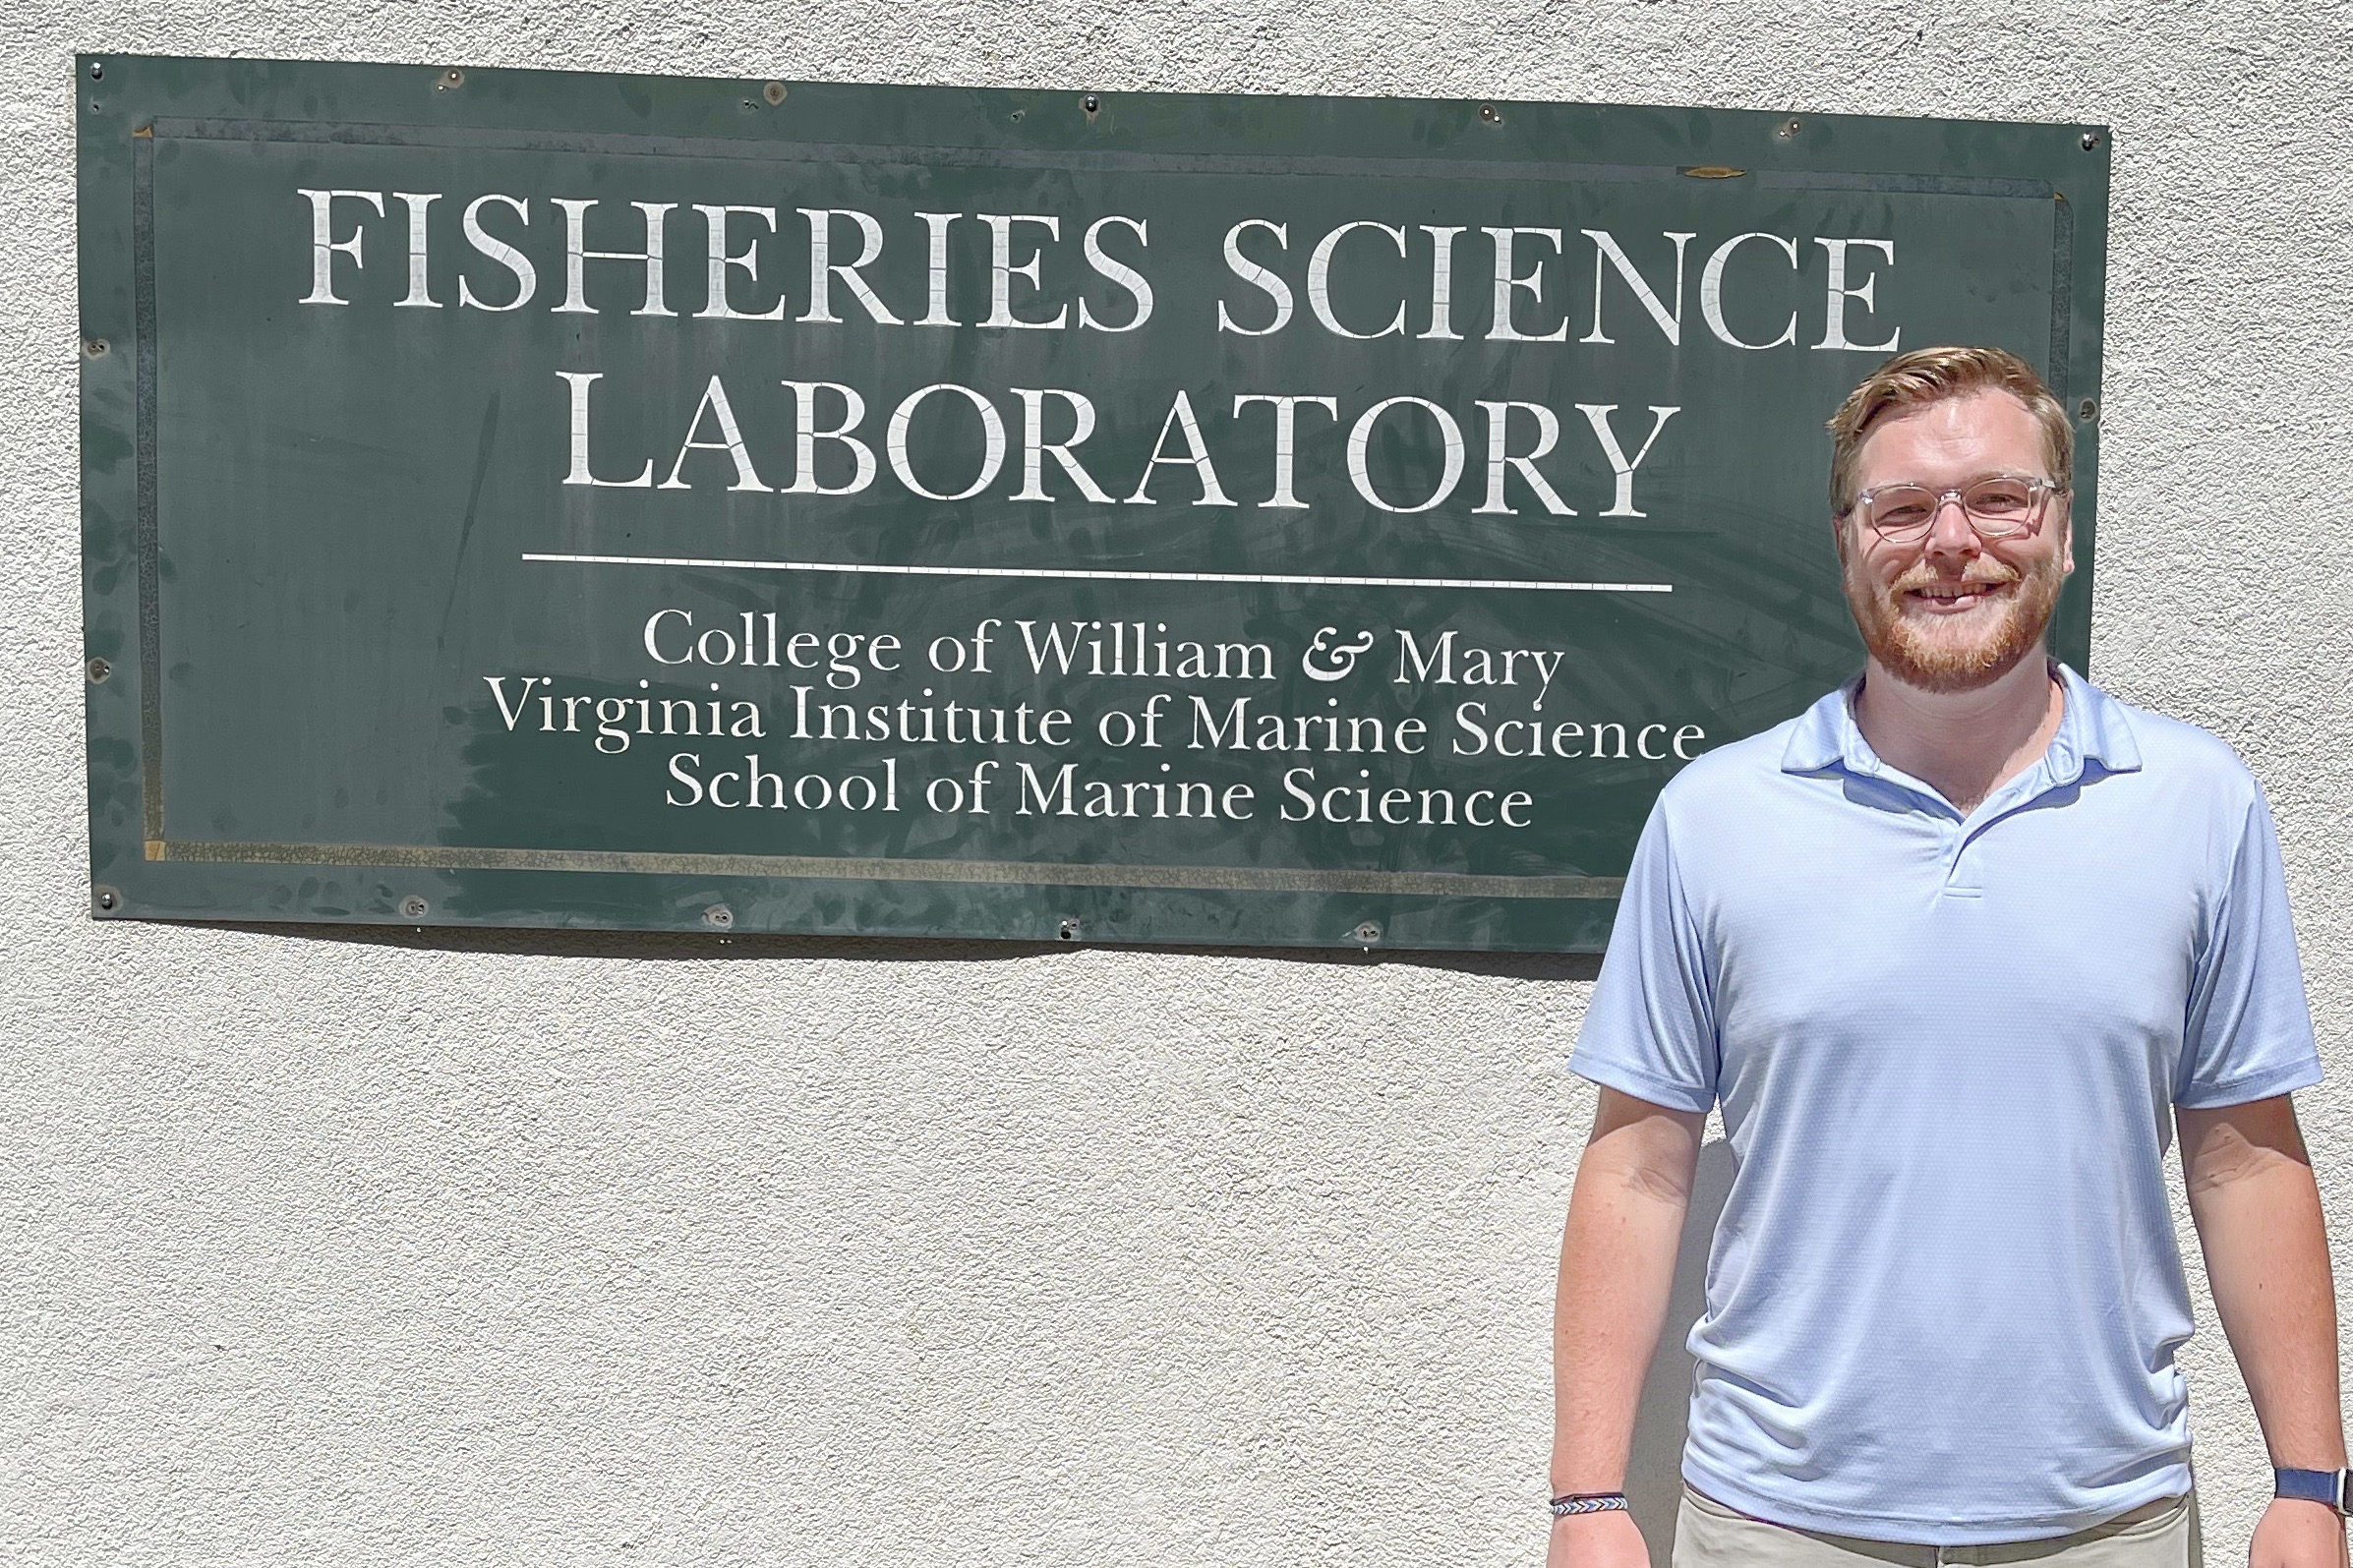 M.A. student Will standing in front of a building sign that says 'Fisheries Science Laboratory'